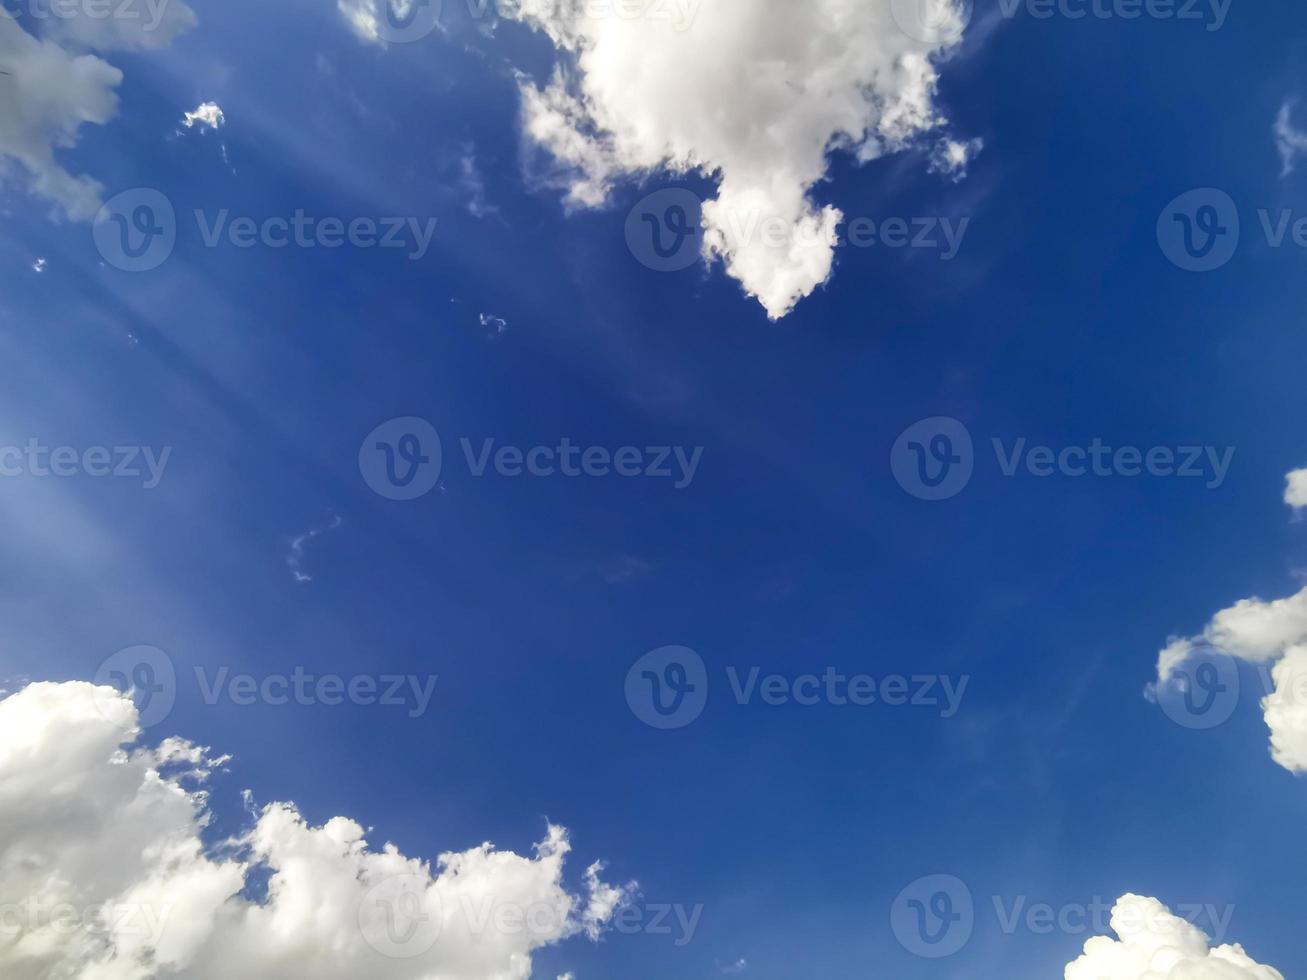 cloud sky clouds blue daytime free space photo